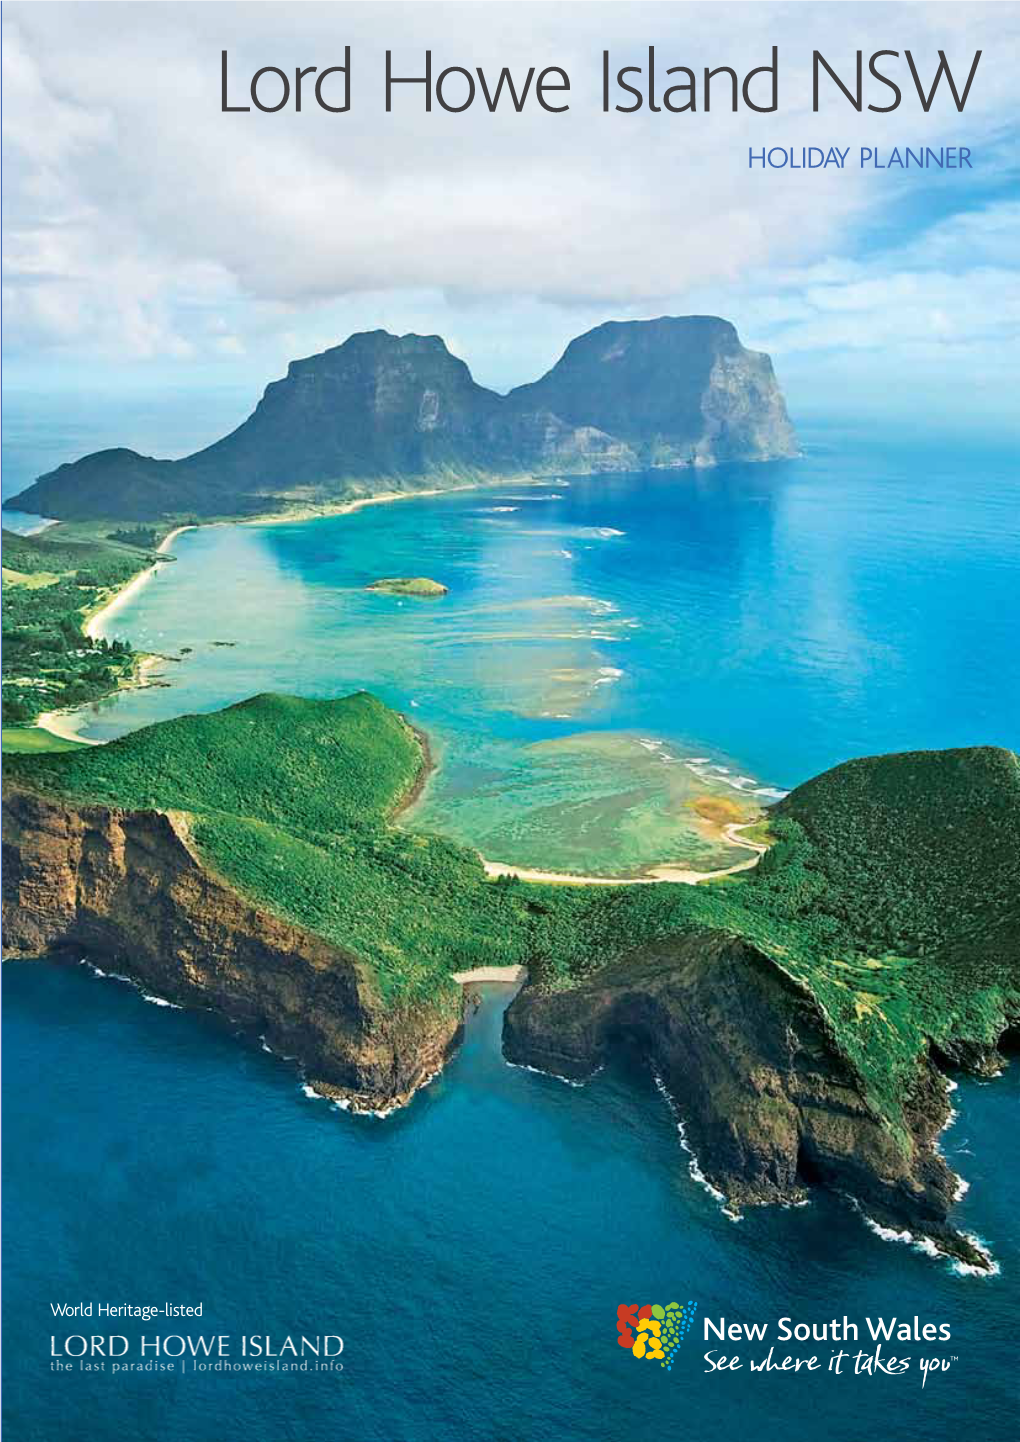 Lord Howe Island NSW Holiday Planner